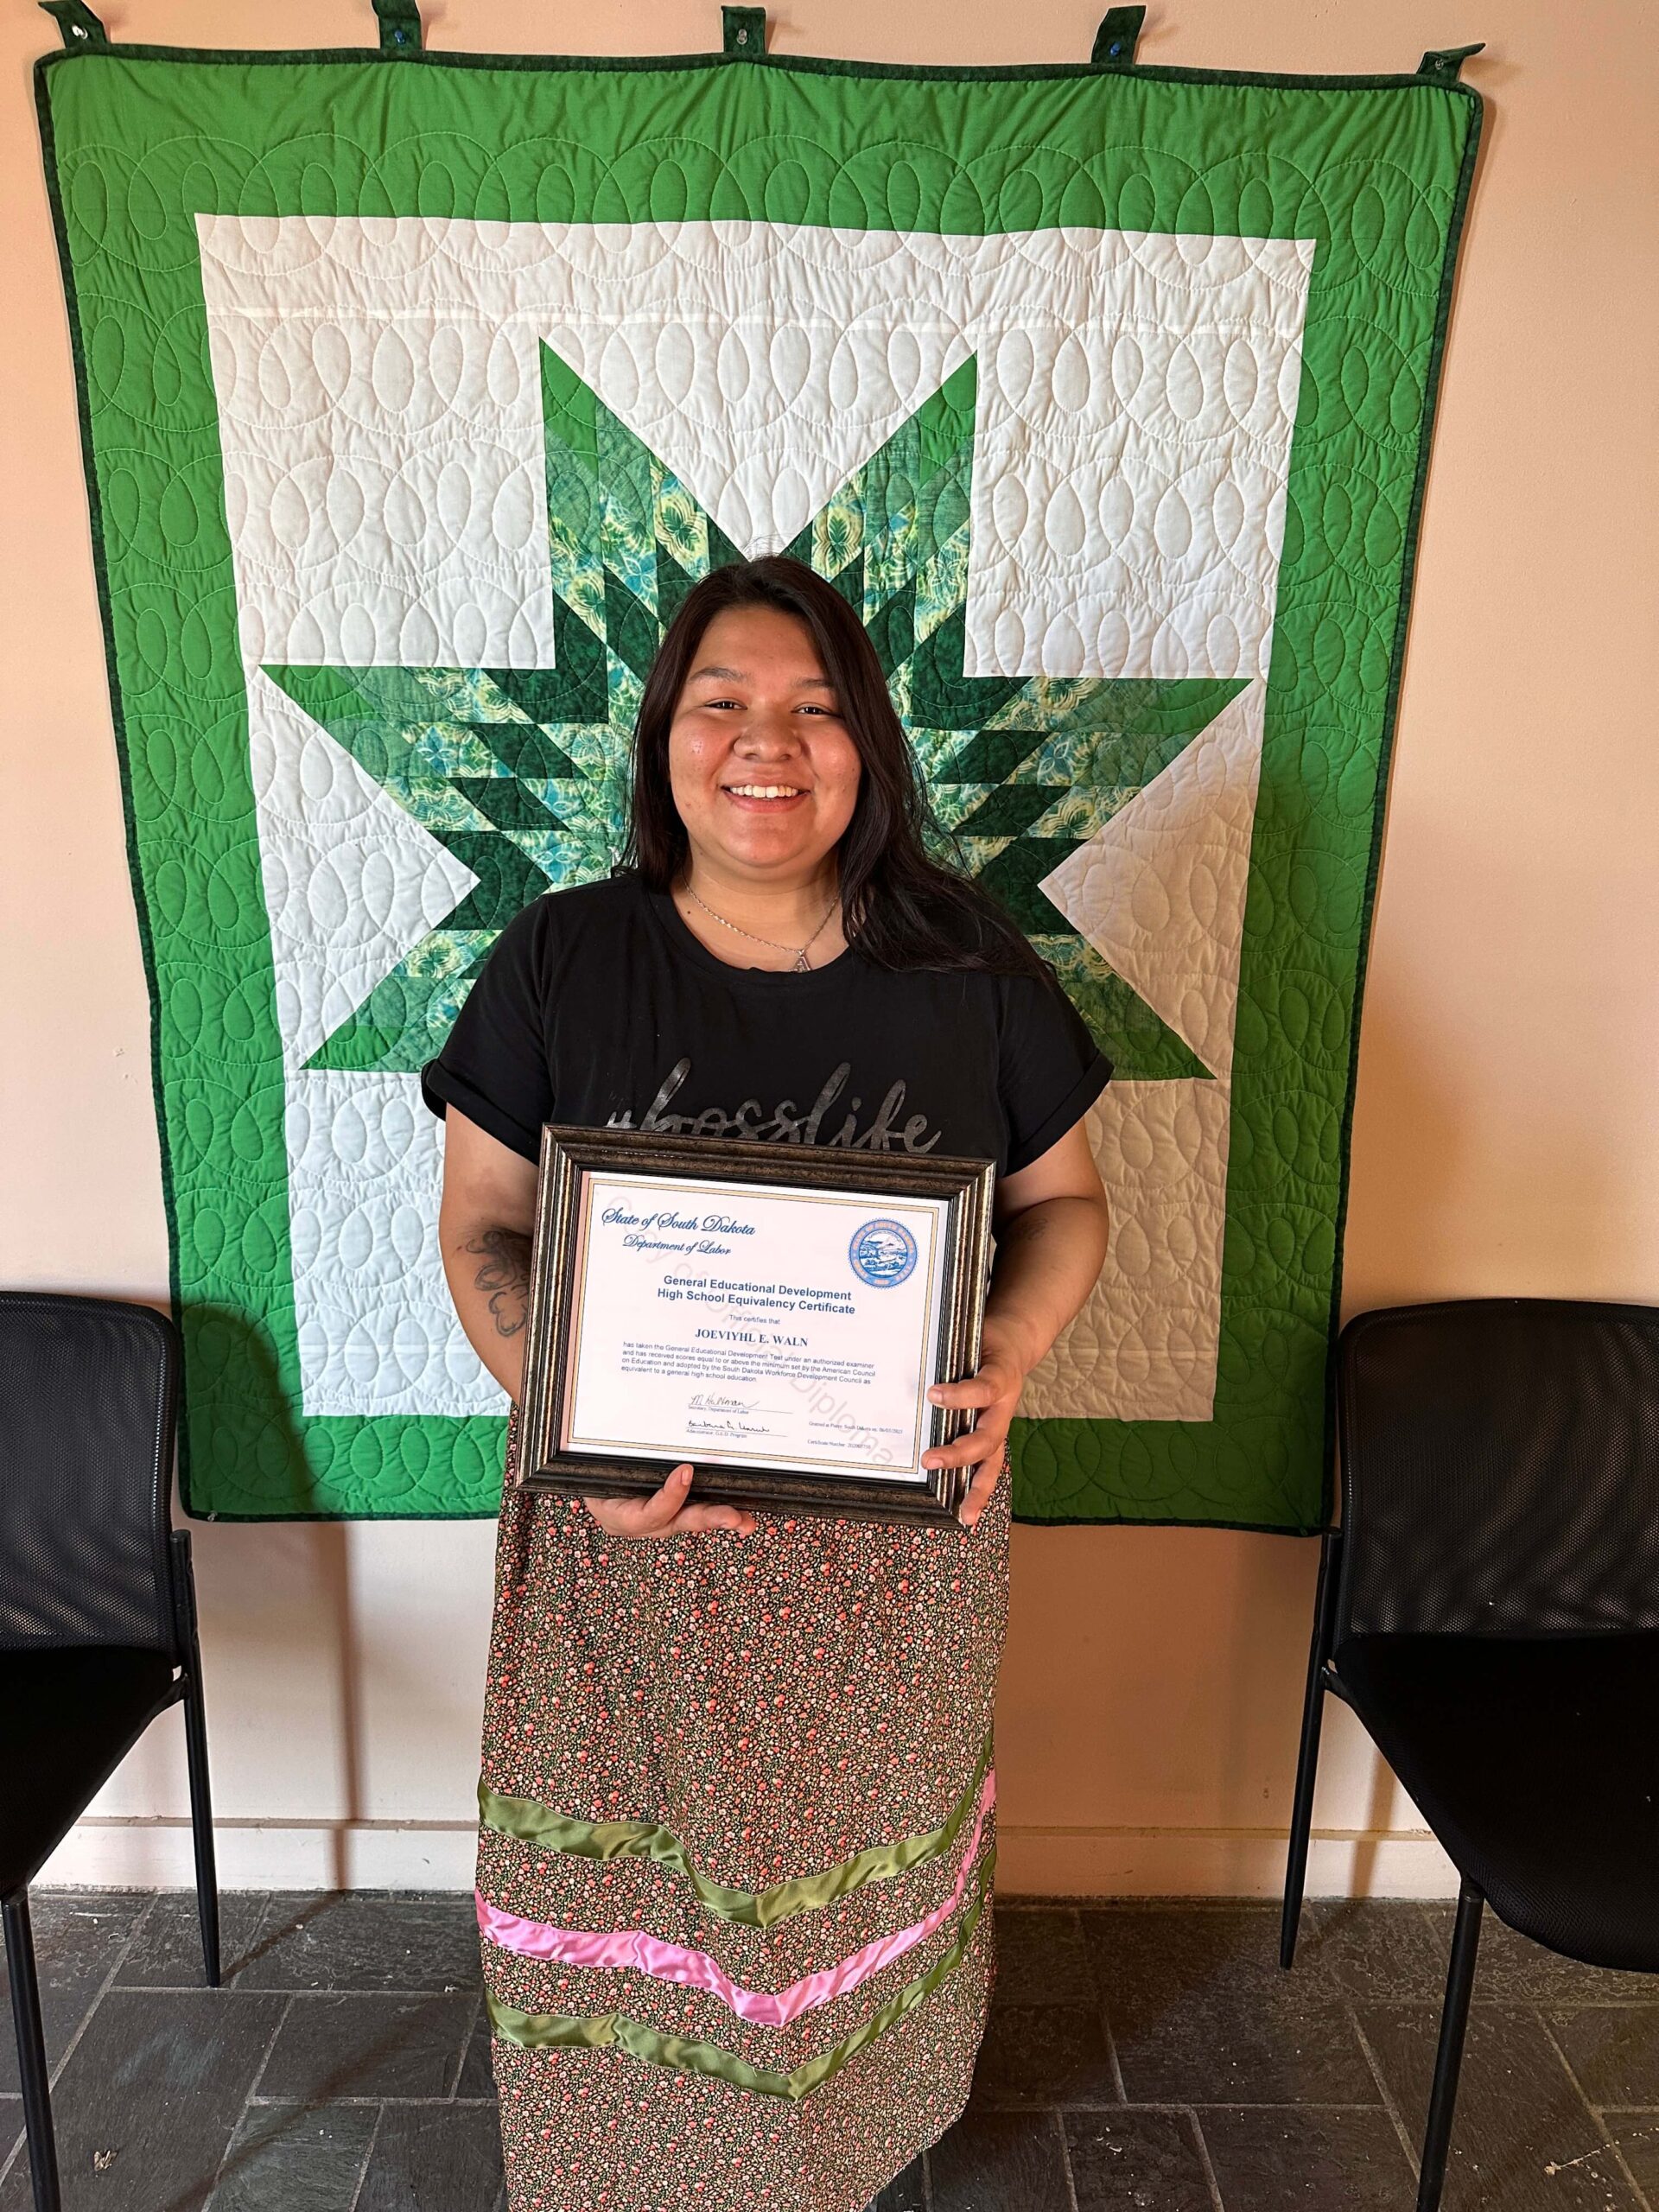 Jo Waln wearing her ribbon skirt while receiving her GED diploma at the Adult Basic Education office.